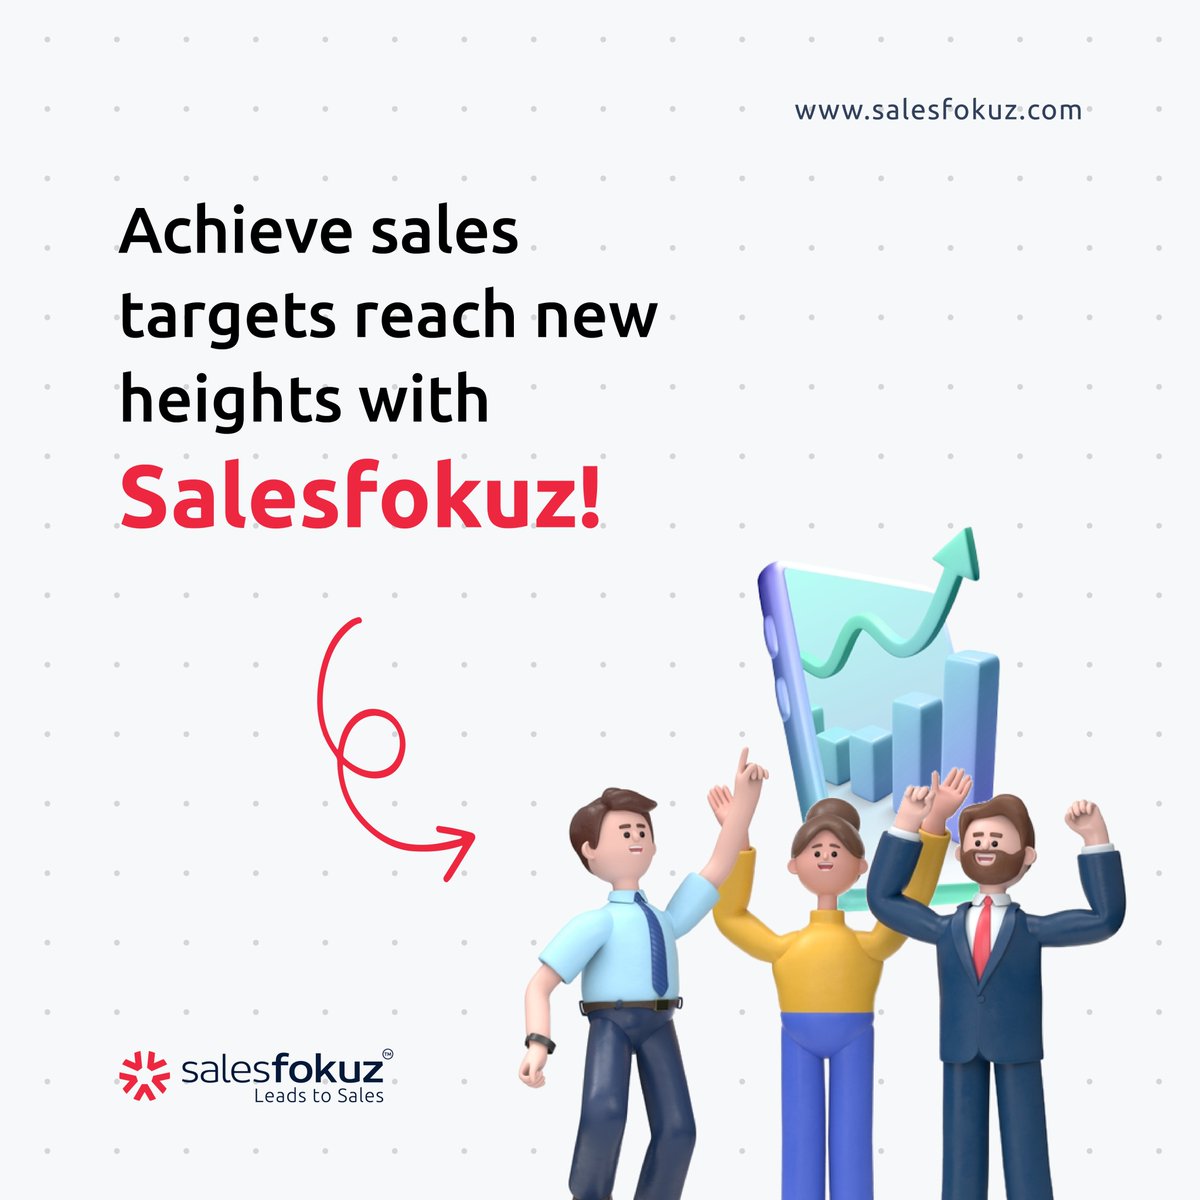 Elevate sales performance by strategically analyzing end-to-end sales activities with Salesfokuz, the sales management tool! Visit: salesfokuz.com #SalesPerformanceManagementTool #FieldForceManagement #SalesTracking #SalesApp #FieldForceTracking #salesmanagementapp